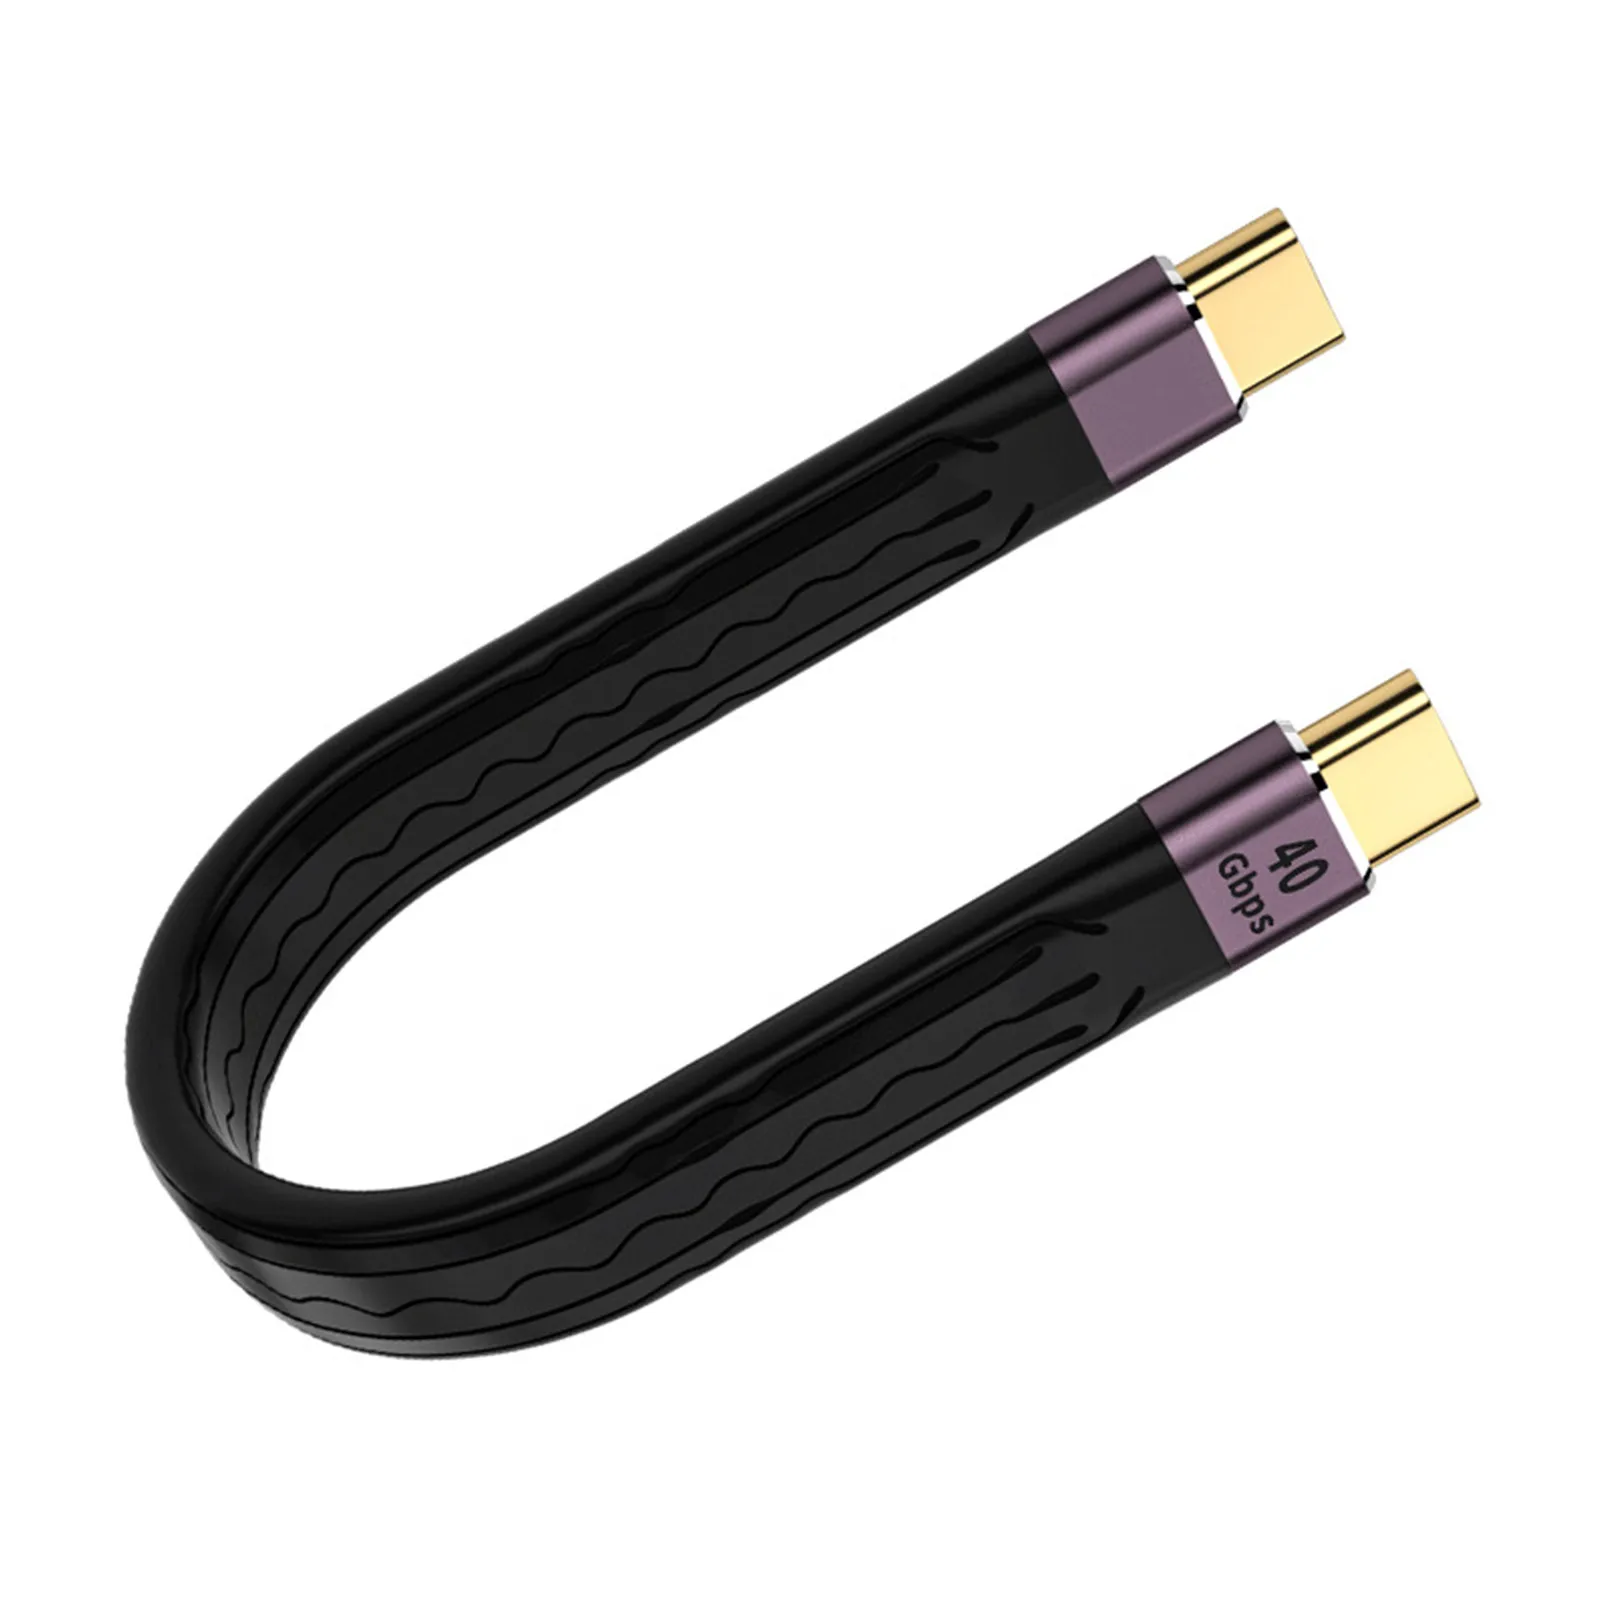 

Flat Short USB C Cable 100W 40Gbps Data Transfer 4K UHD Video PD Fast Charging FPC 3.1 Gen 2 USB C To USB C Cable Compatible